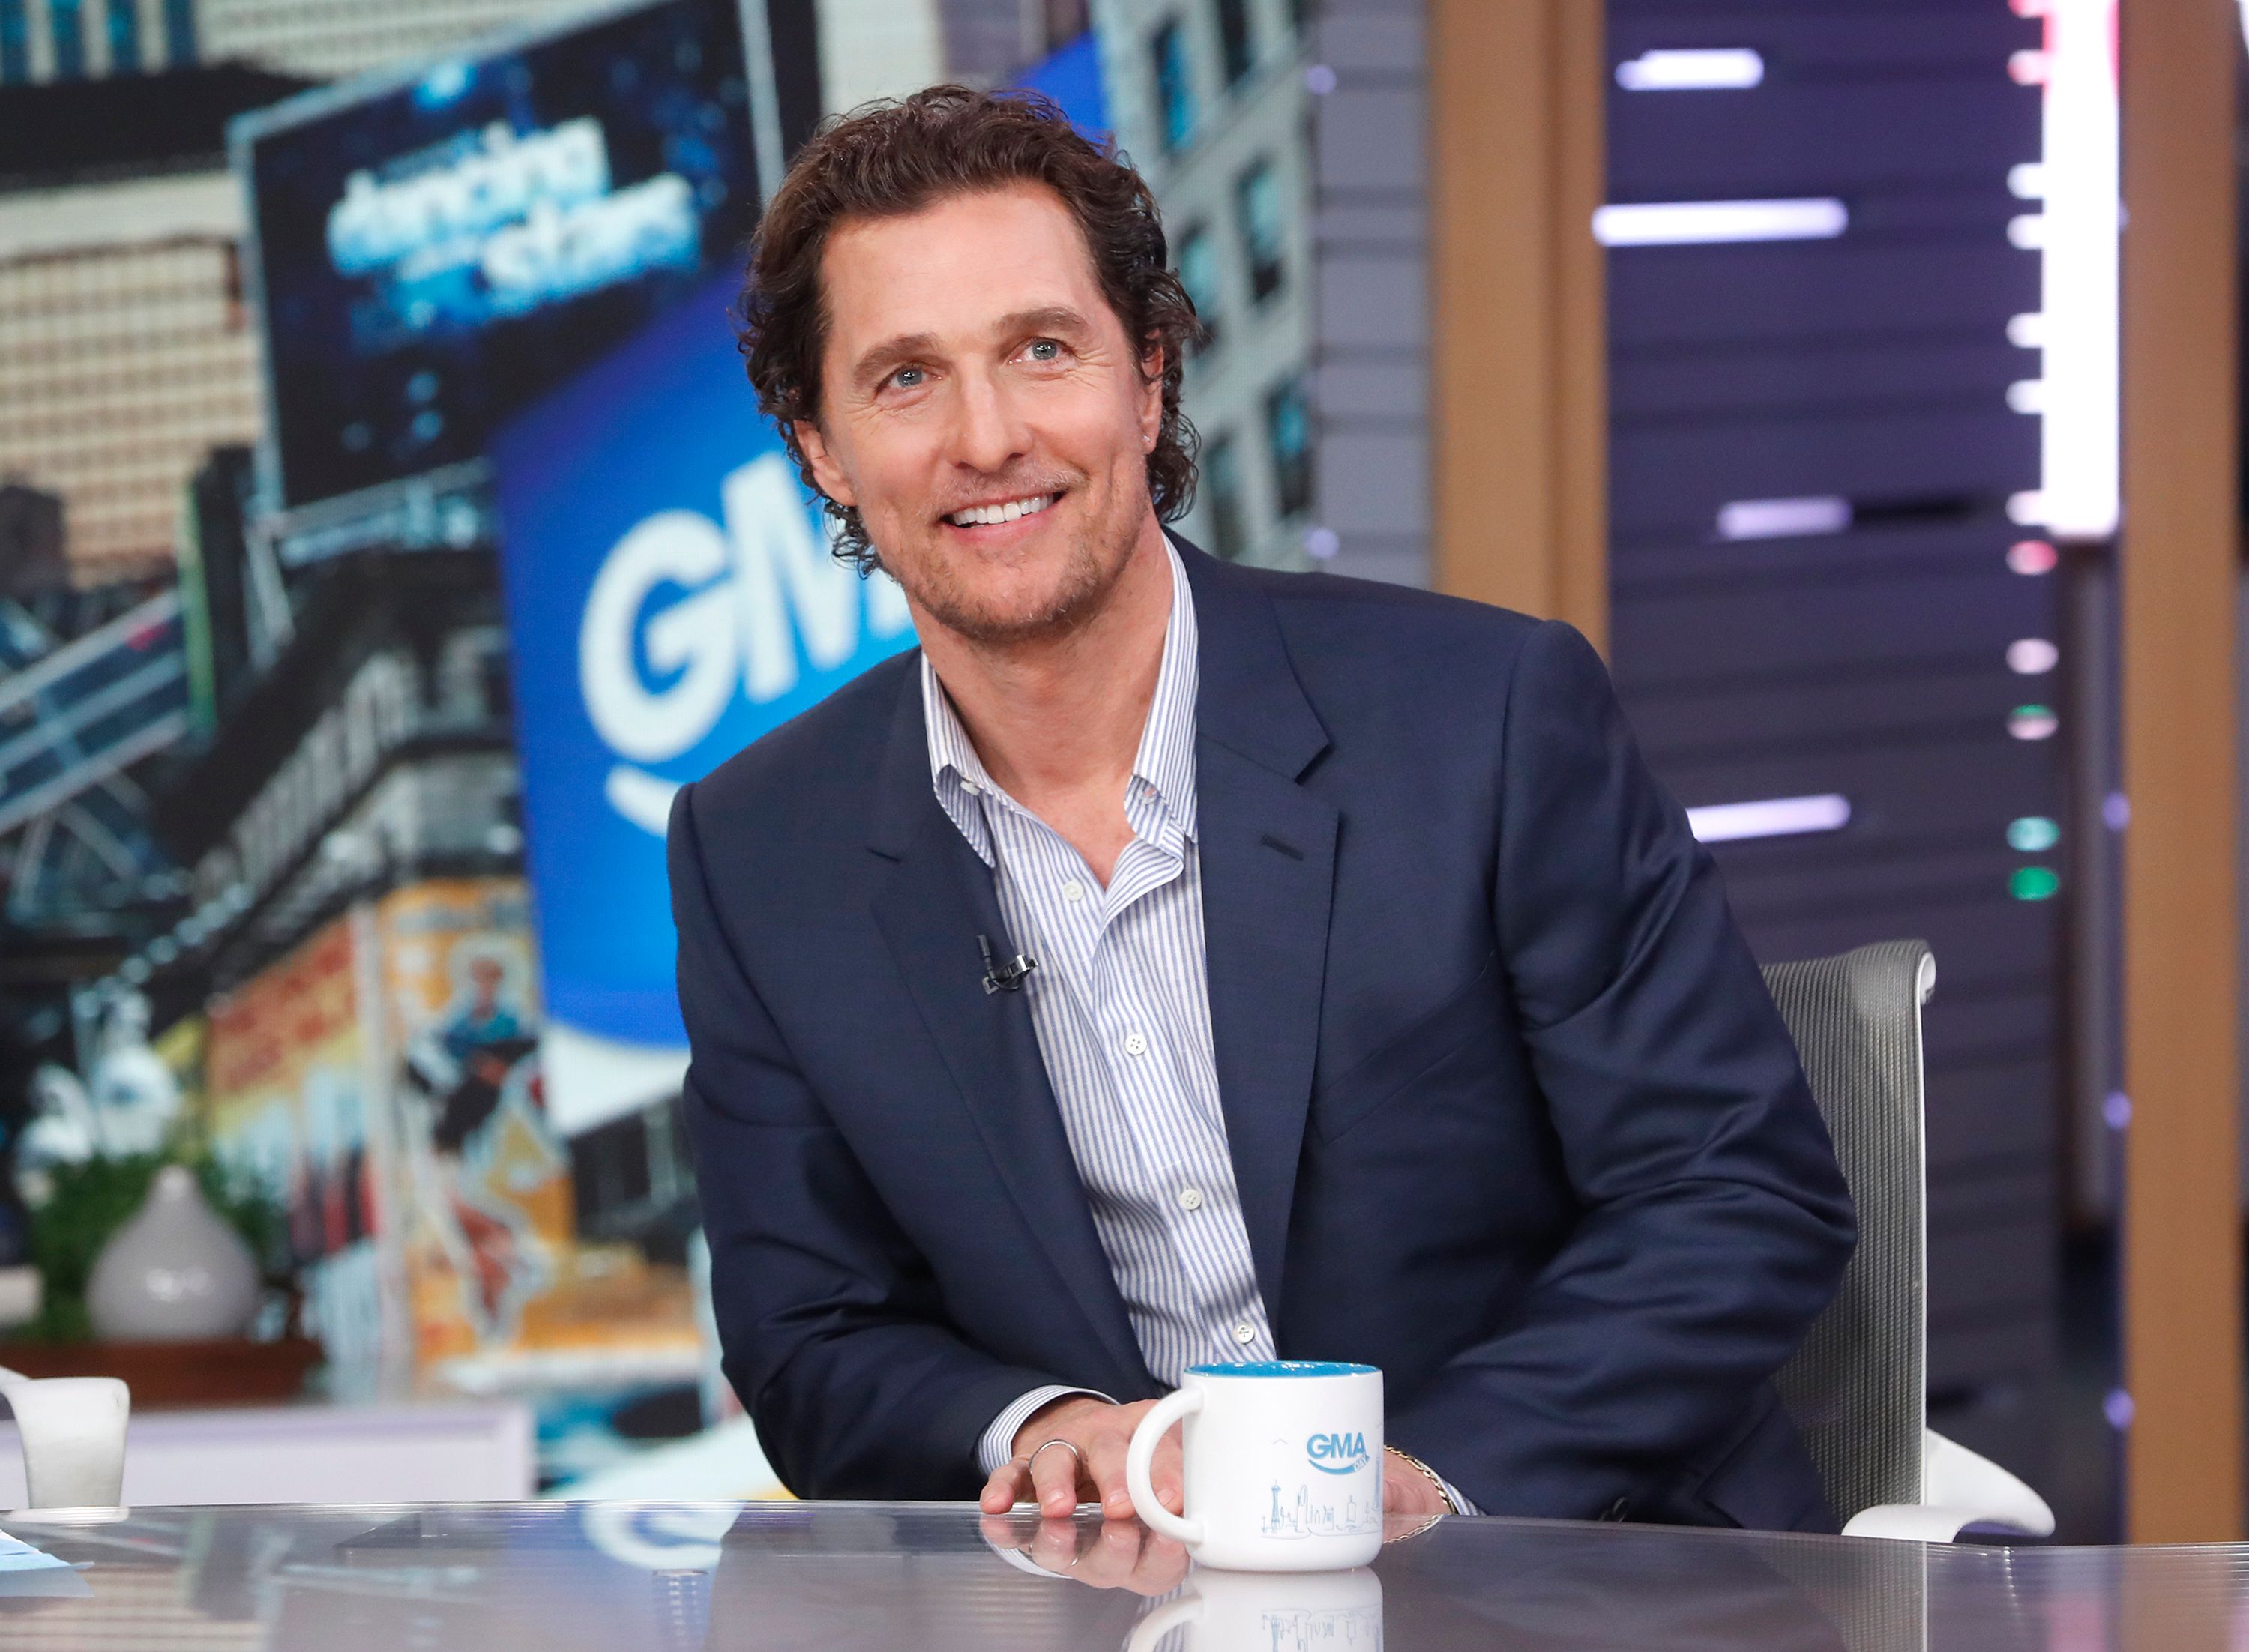 Matthew McConaughey as a guest on "GMA DAY," Thursday January 24, 2019 | Photo: Getty Images